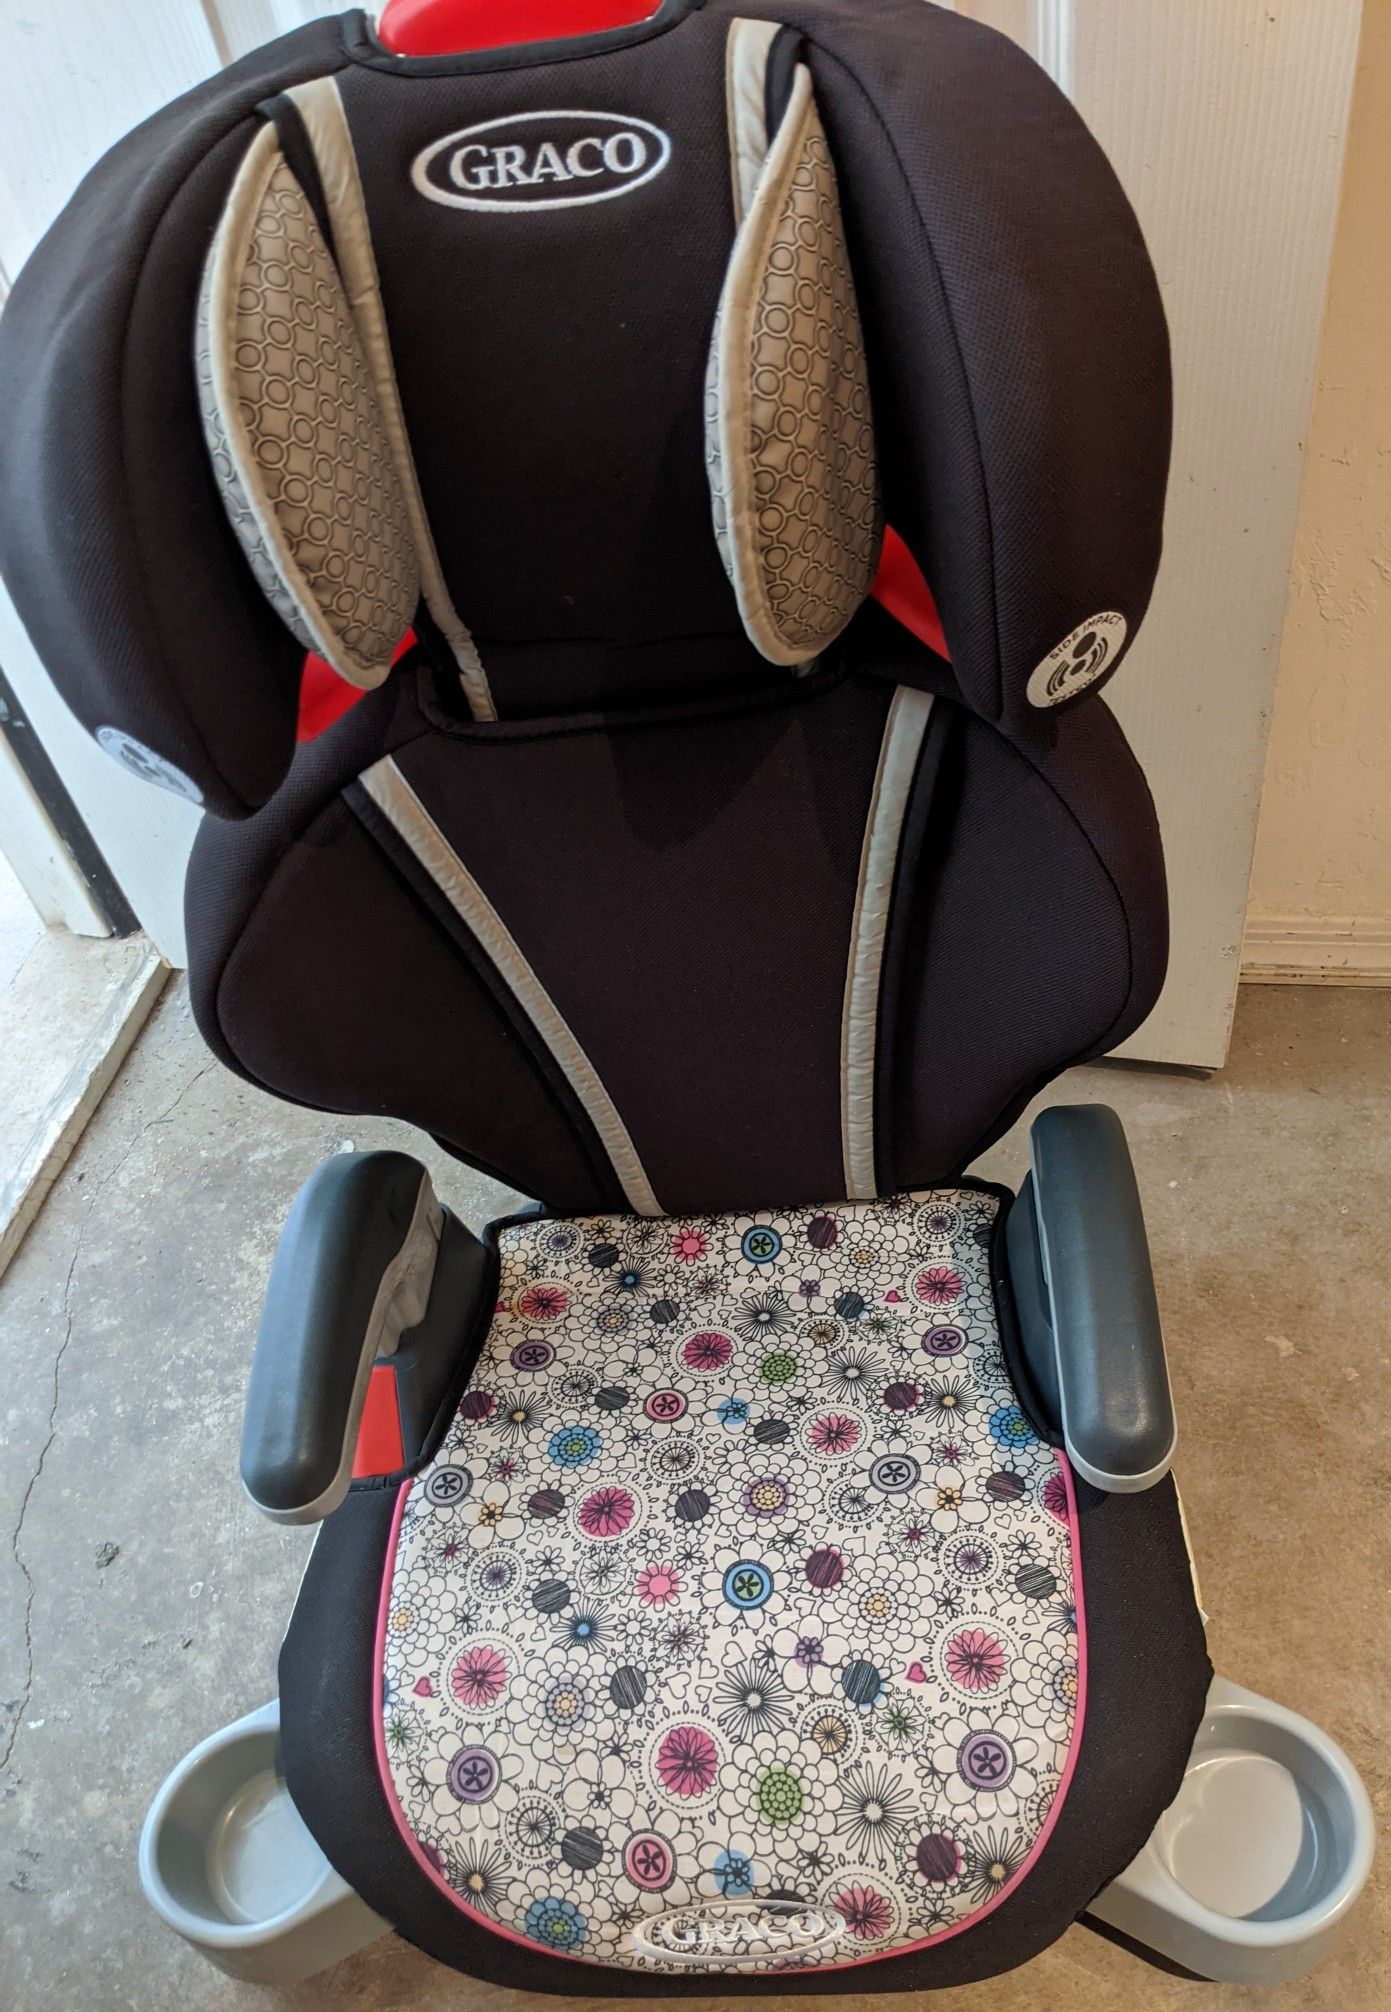 GRACO booster seat very good condition!!!